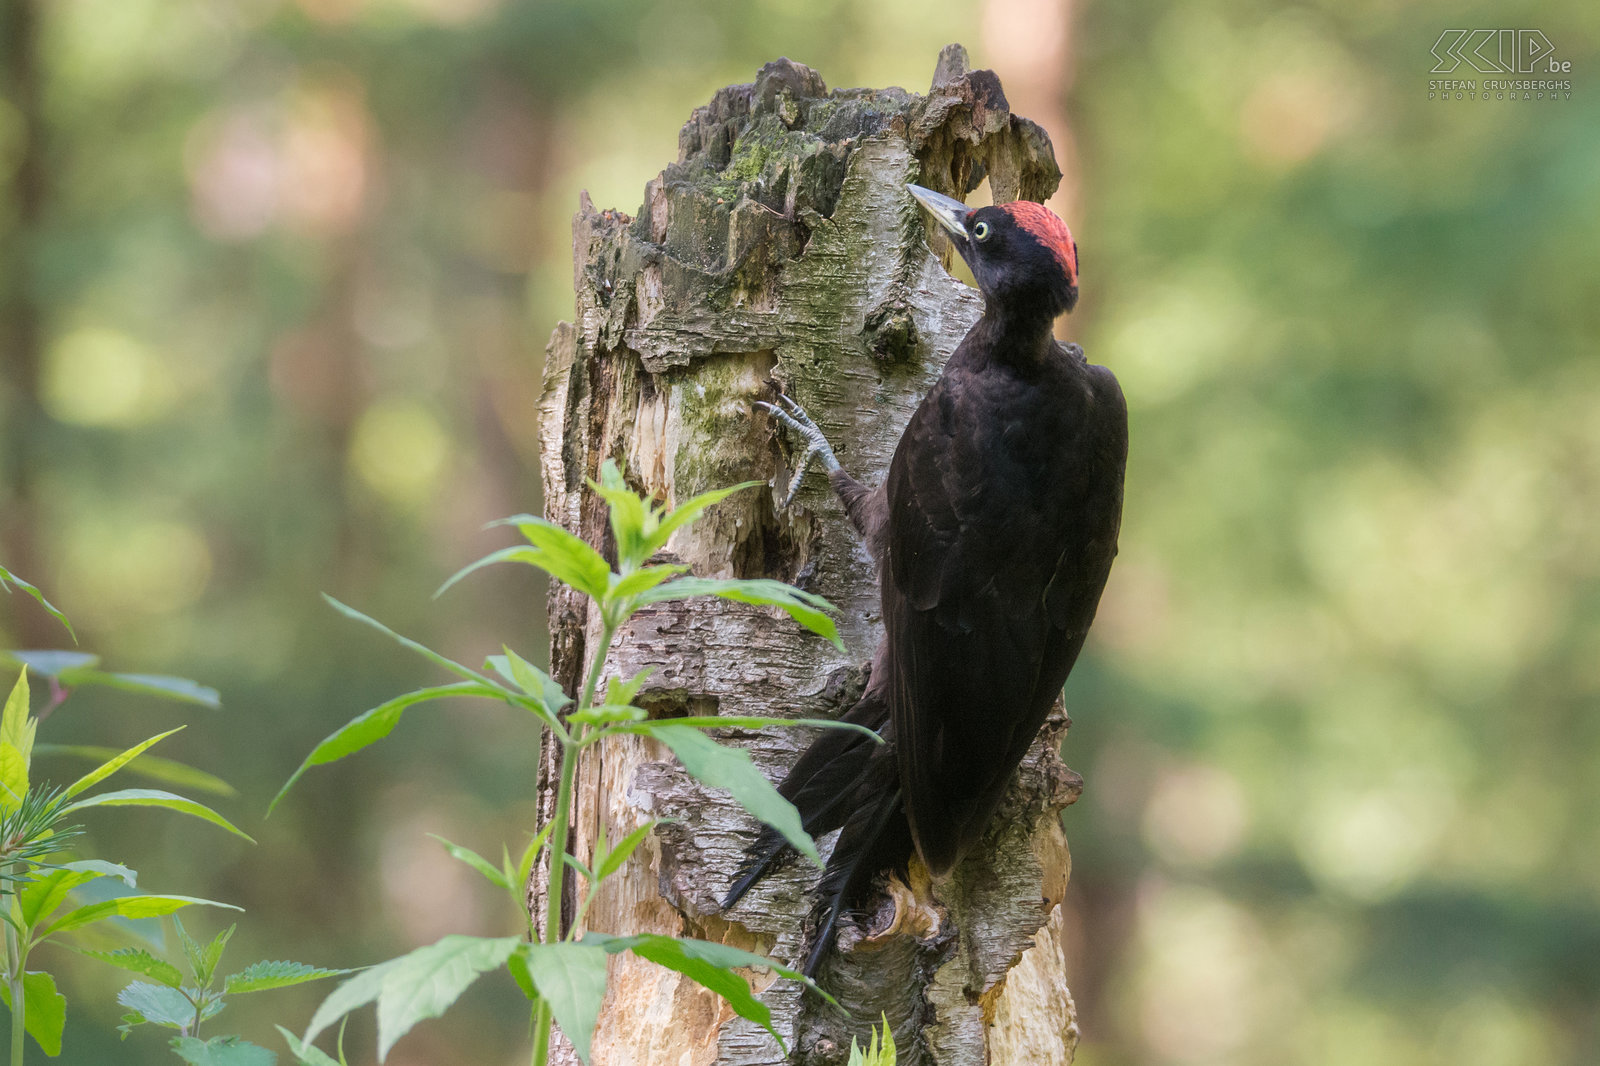 Woodpeckers - Black woodpecker The black woodpecker (Dryocopus martius) is about 50 cm tall and it is the largest woodpecker in Europe. This woodpecker is quite rare. This bird prefers large, old forests where many old and rotten trees can be found.  Stefan Cruysberghs